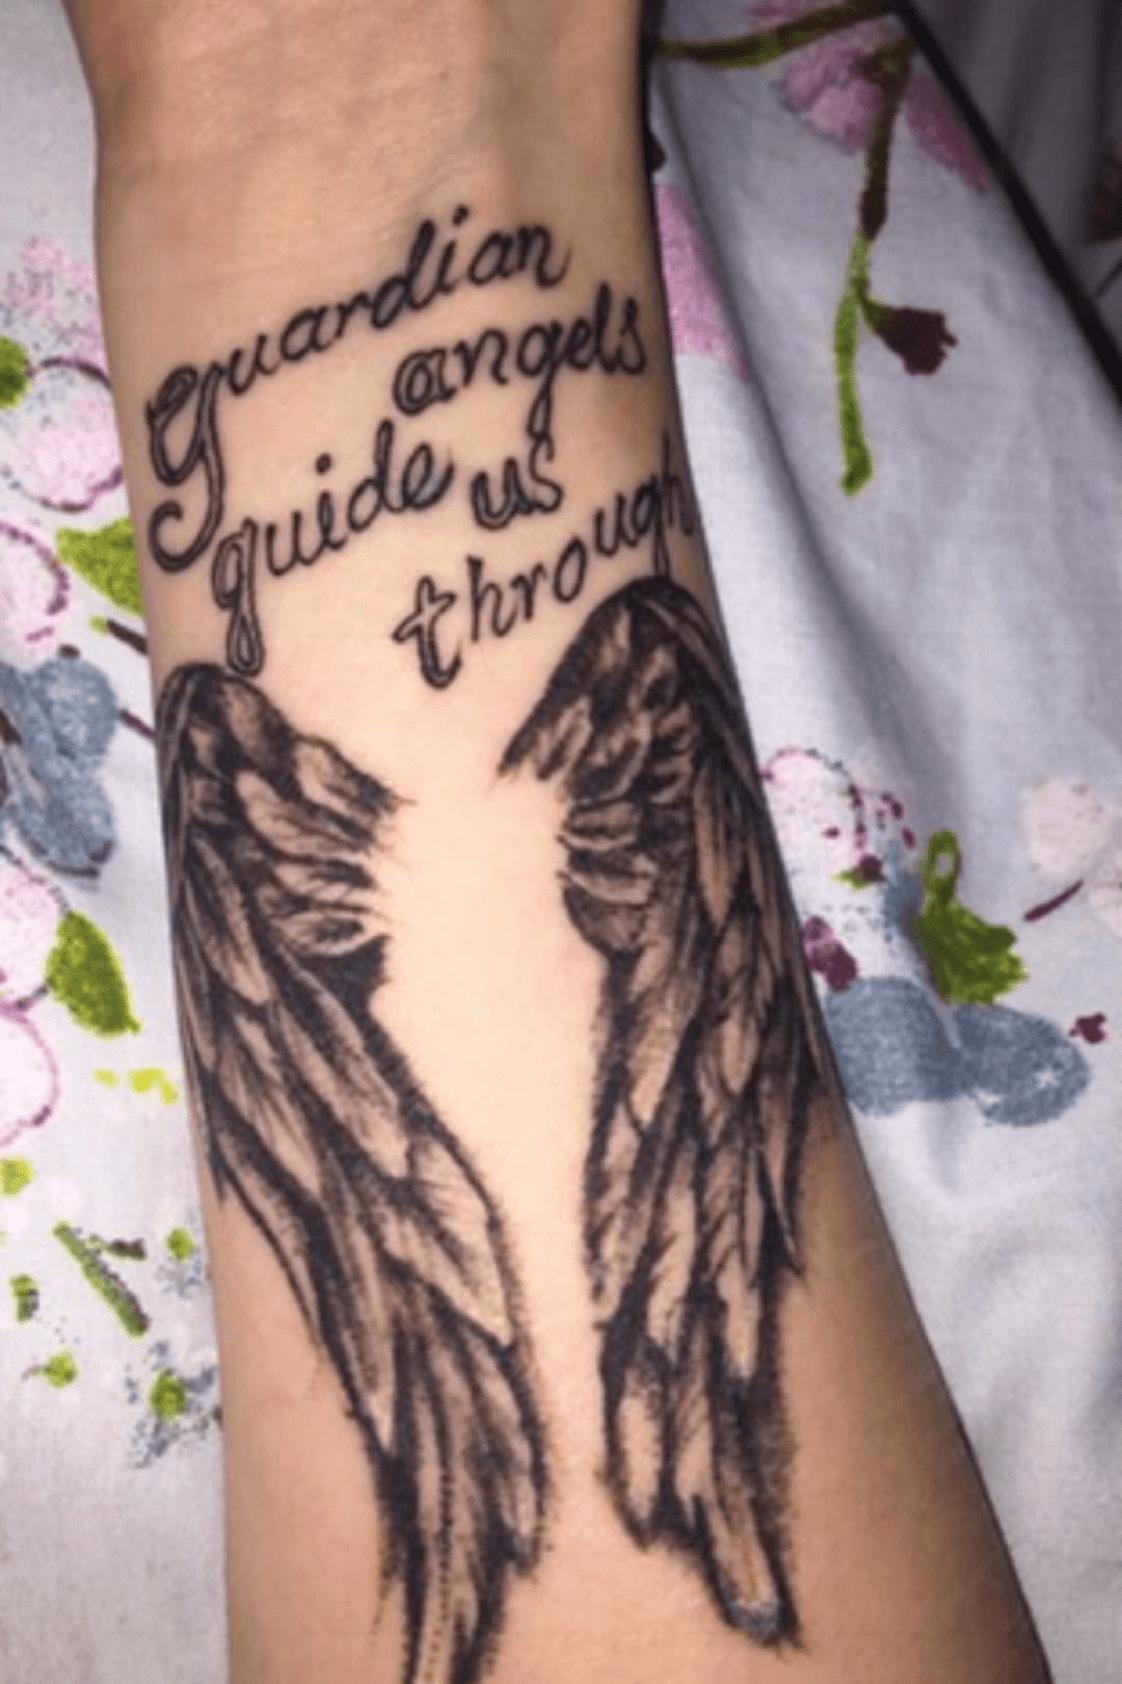 guardian angels quotes tattoo